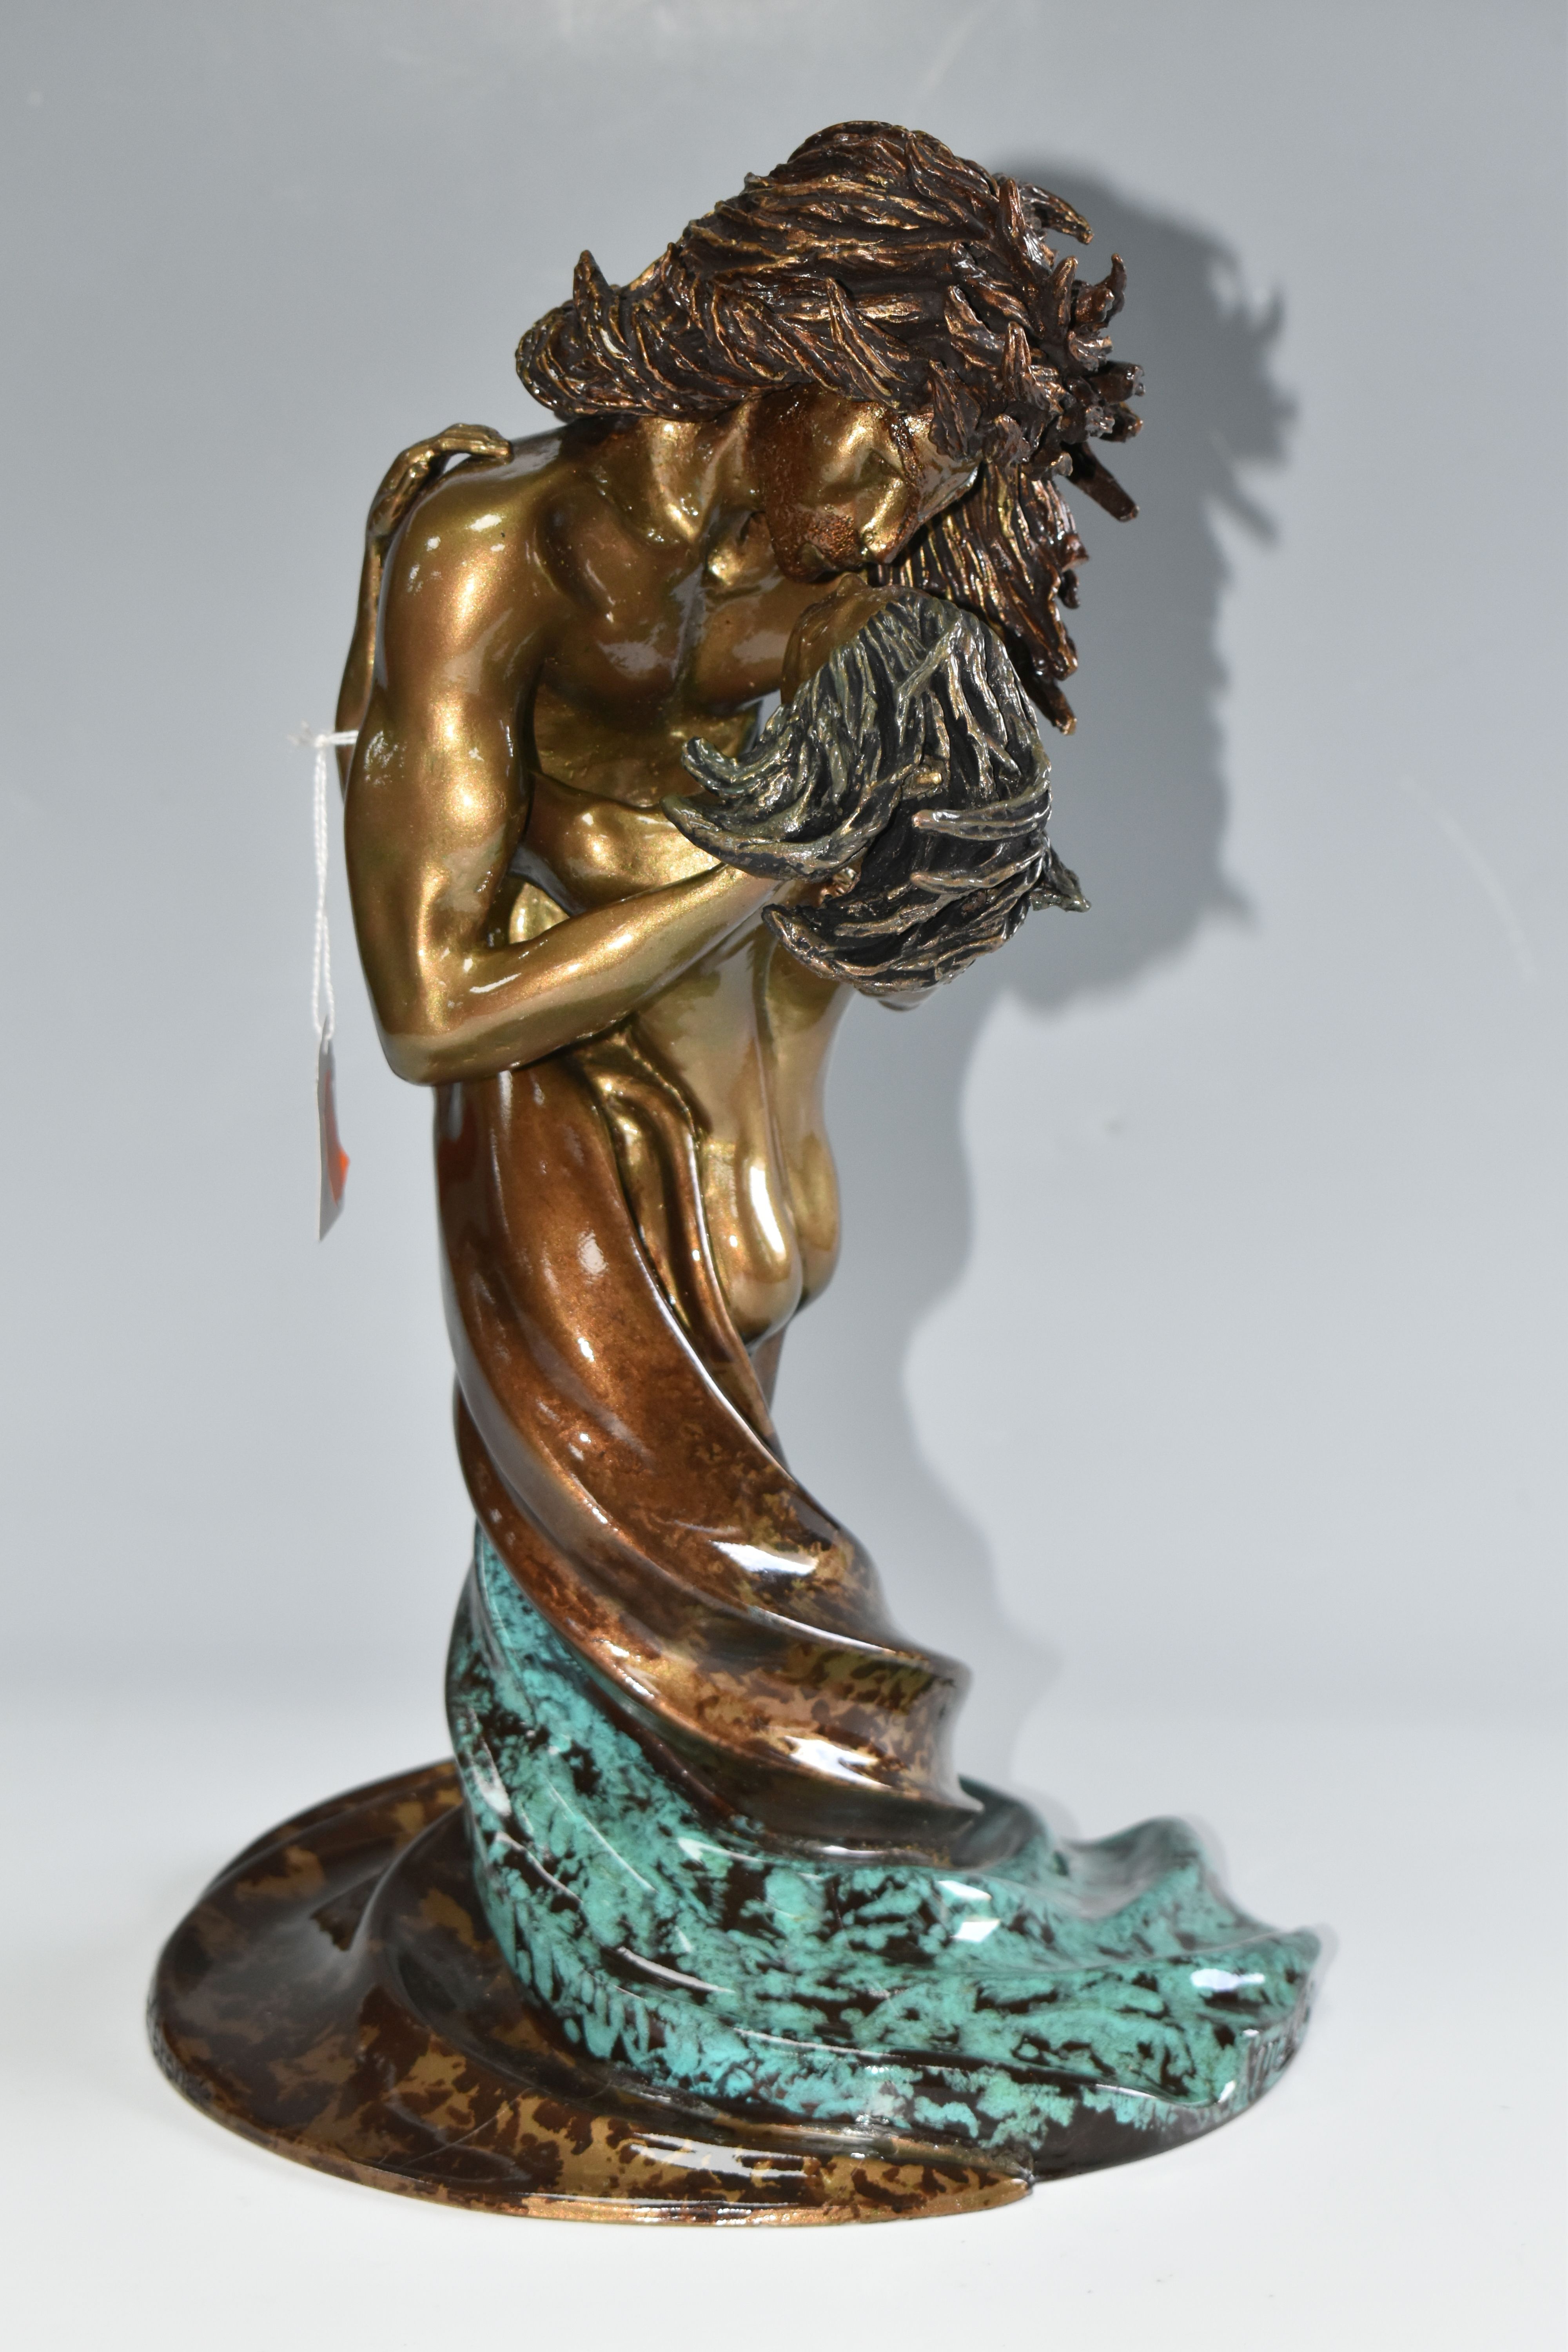 A LIMITED EDITION BONDED BRONZE OR BRONZED RESIN SCULPTURE, depicting two figures in an embrace,